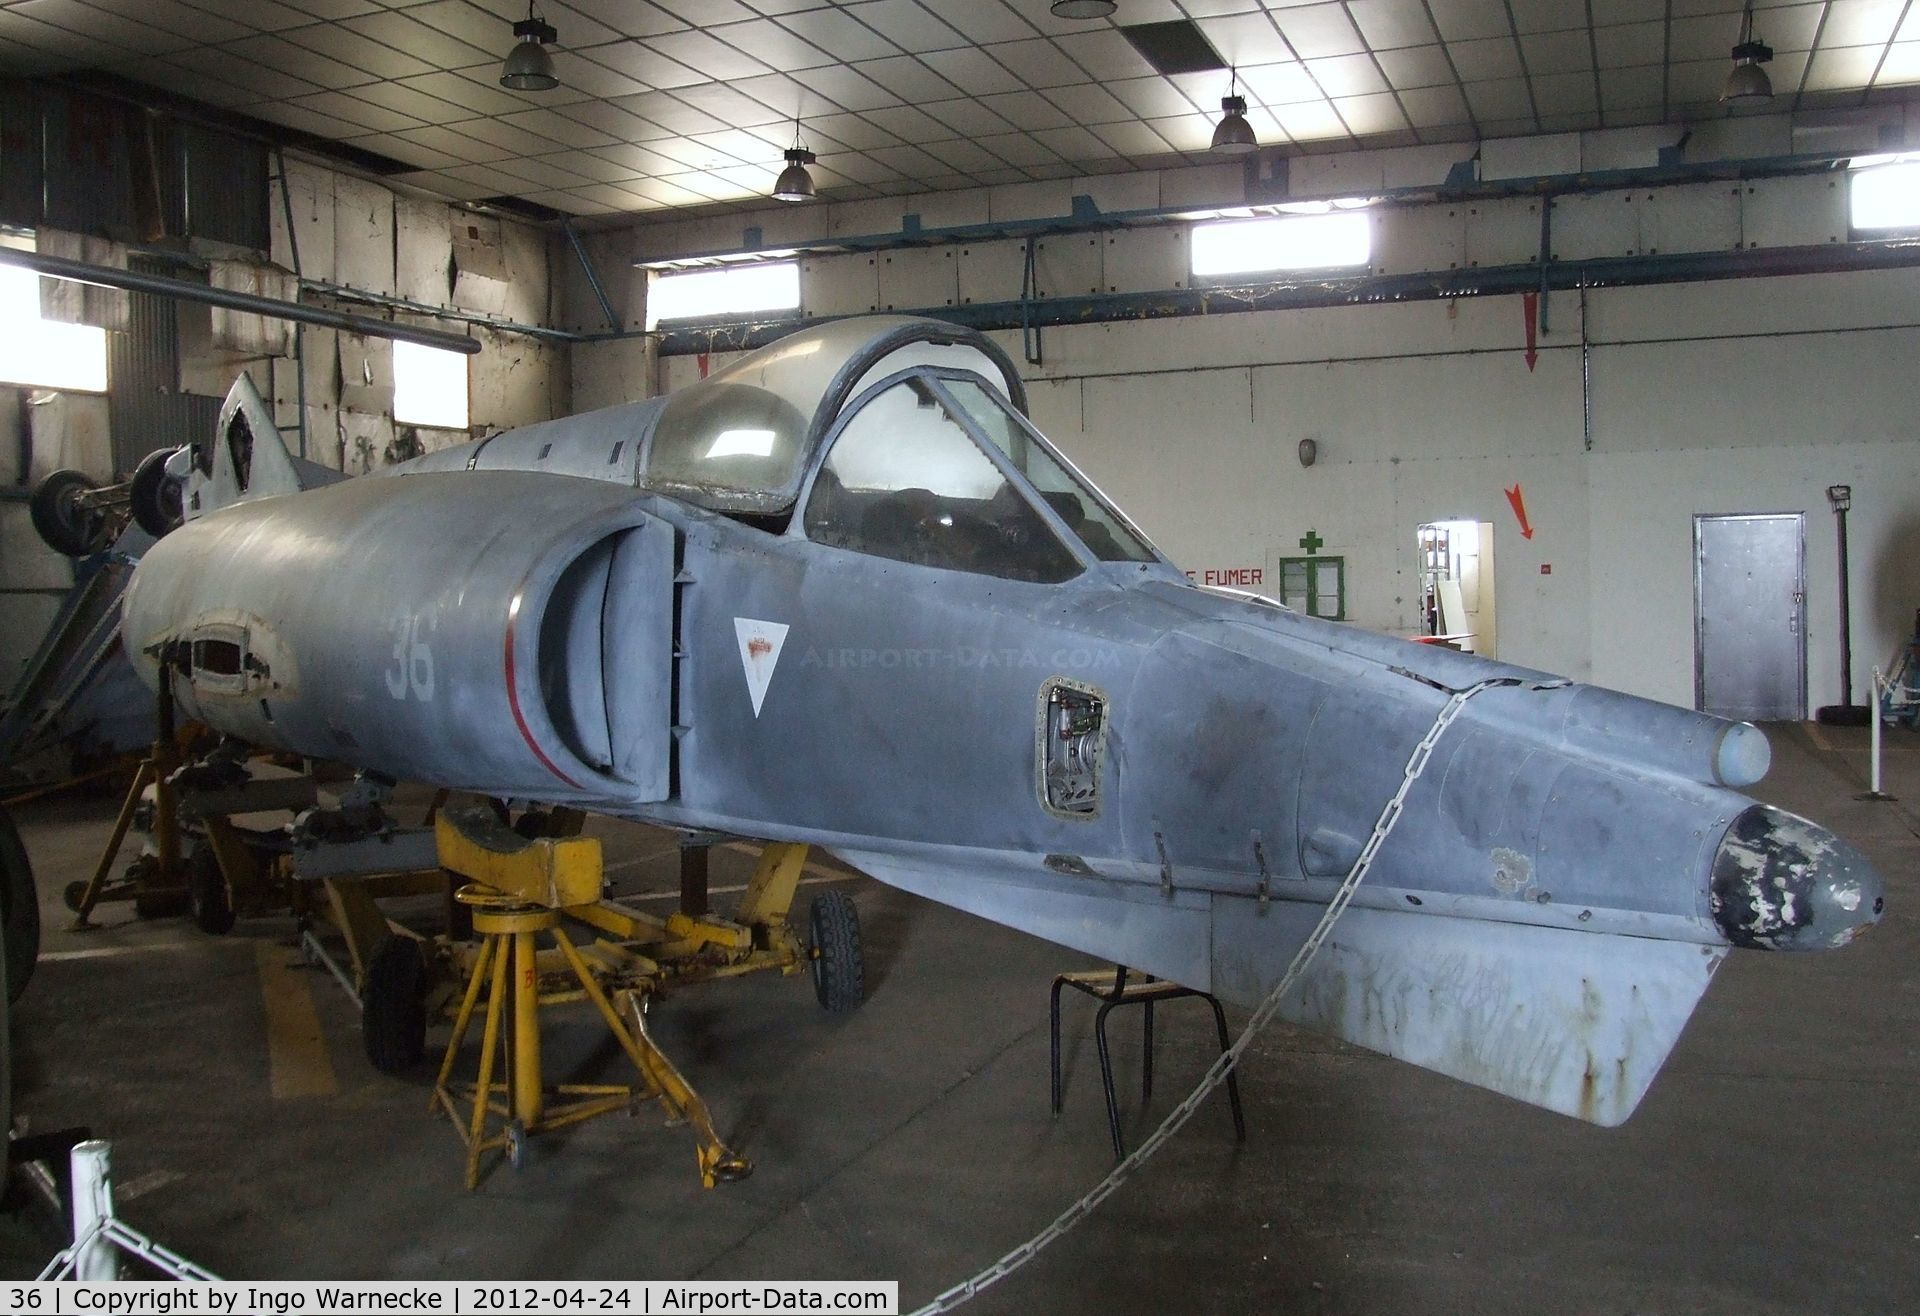 36, Dassault Etendard IV.M C/N 36, Dassault Etendard IV M (wings and tail dismounted) being restored at the EALC Musee de l'Aviation Clement Ader, Lyon-Corbas